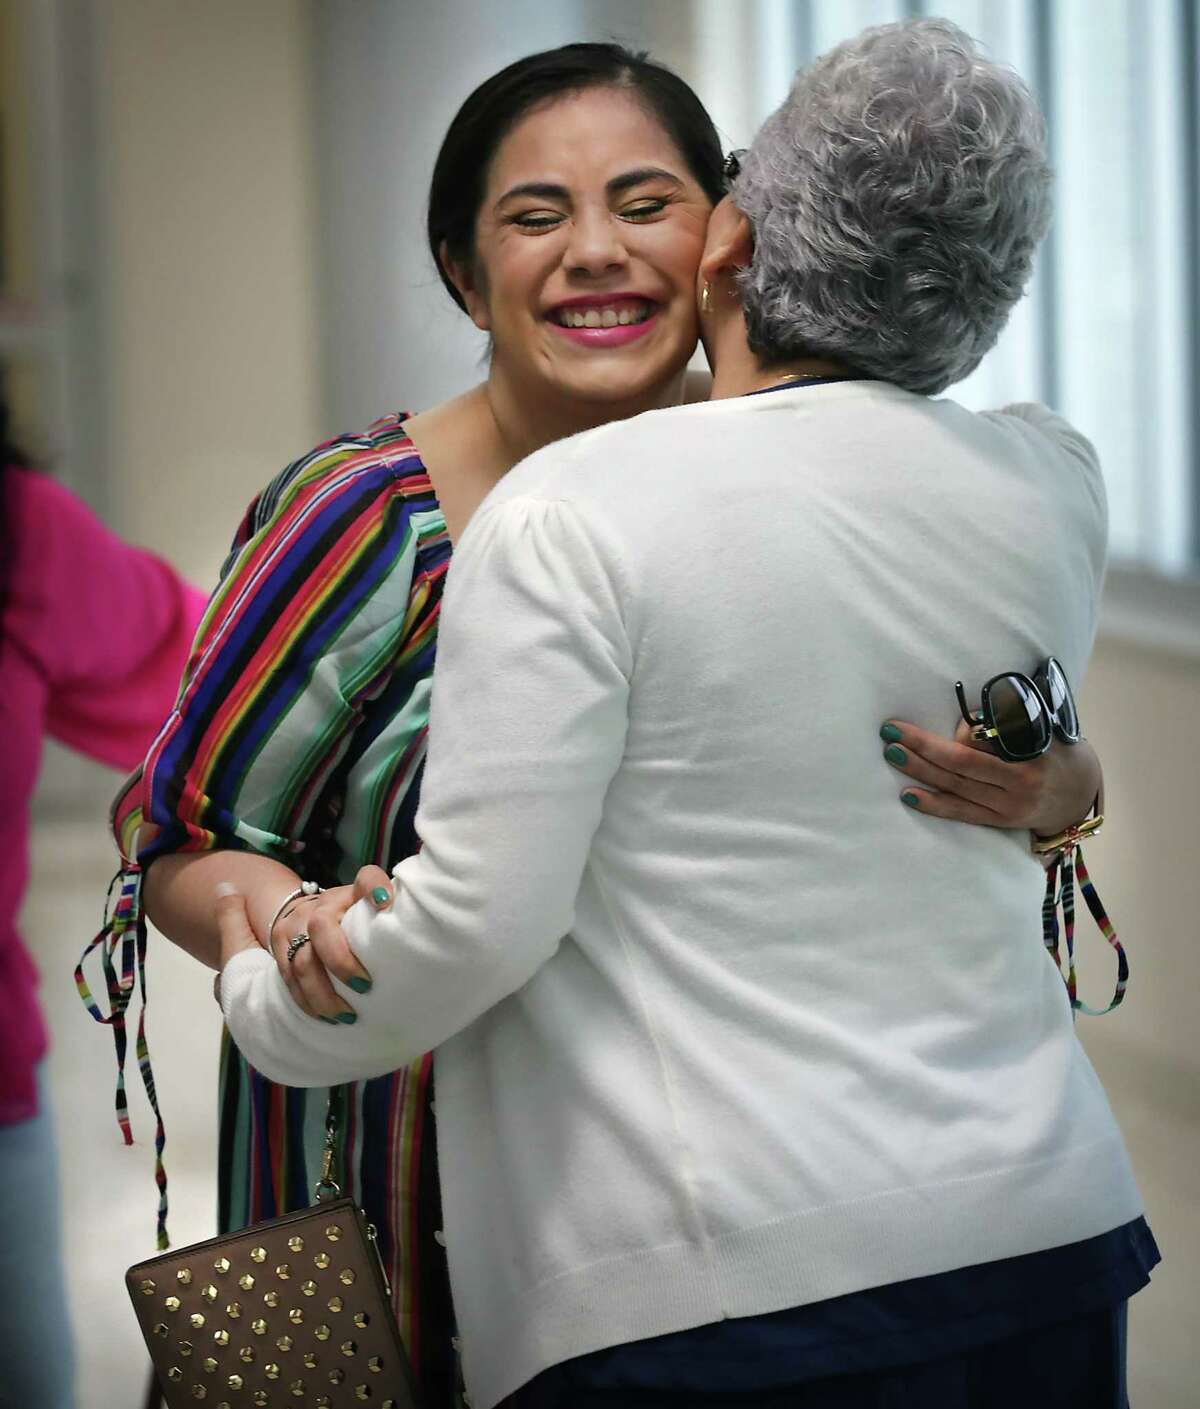 Celma Herrera hugs nurse Vicenta Gutierrez, who sang "Chiquitita" by ABBA every day to Herrera to help regain her memory. Herrera was reunited on May 17, 2019, with the neurological intensive care doctors and nurses at Methodist Hospital in San Antonio who helped save her life and deliver her baby boy seven months ago.